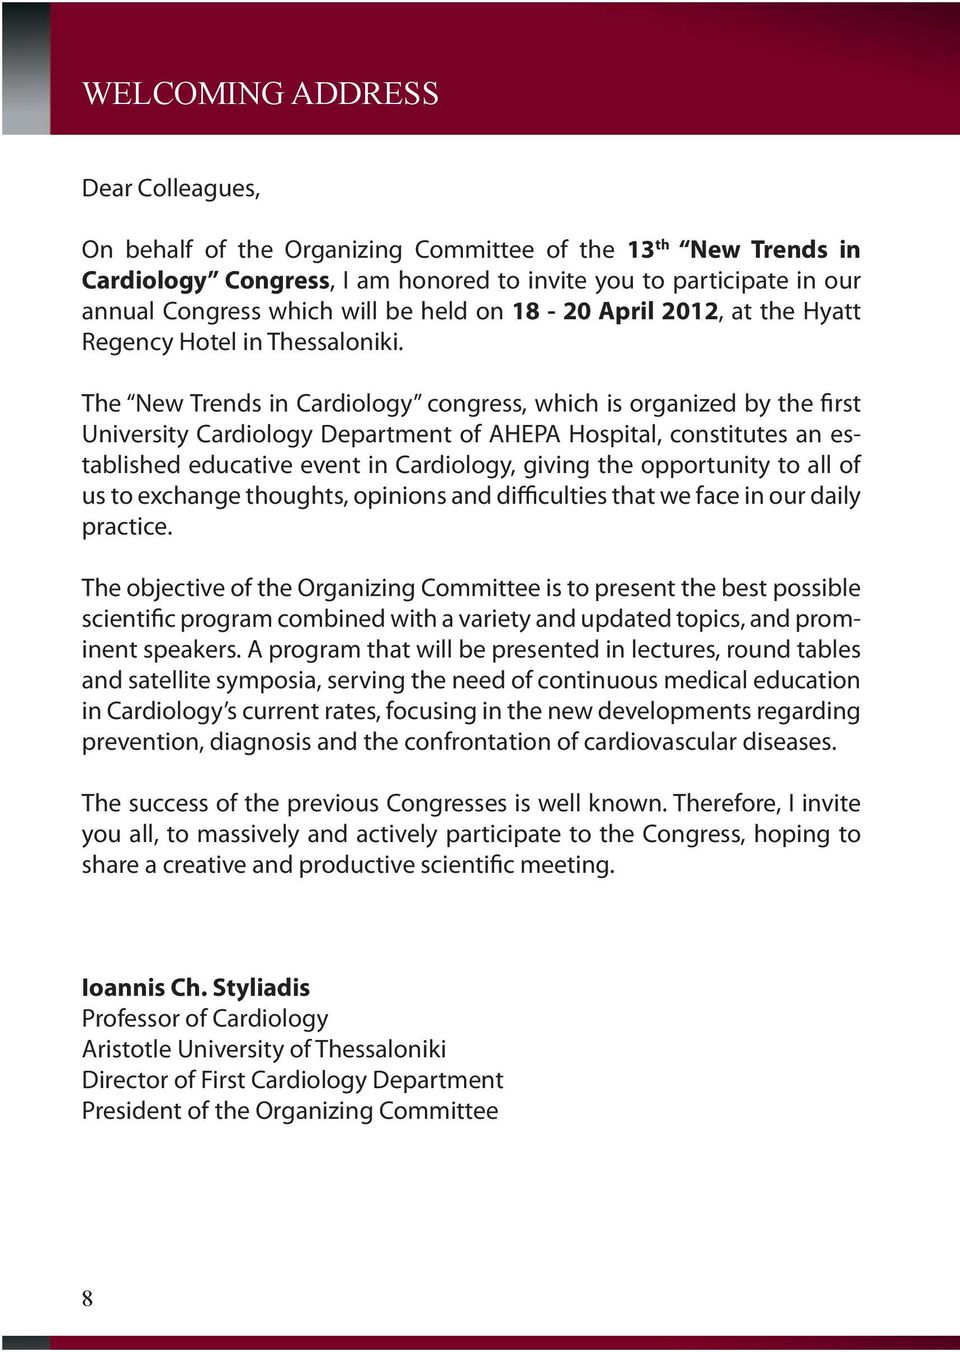 The New Trends in Cardiology congress, which is organized by the first University Cardiology Department of AHEPA Hospital, constitutes an established educative event in Cardiology, giving the